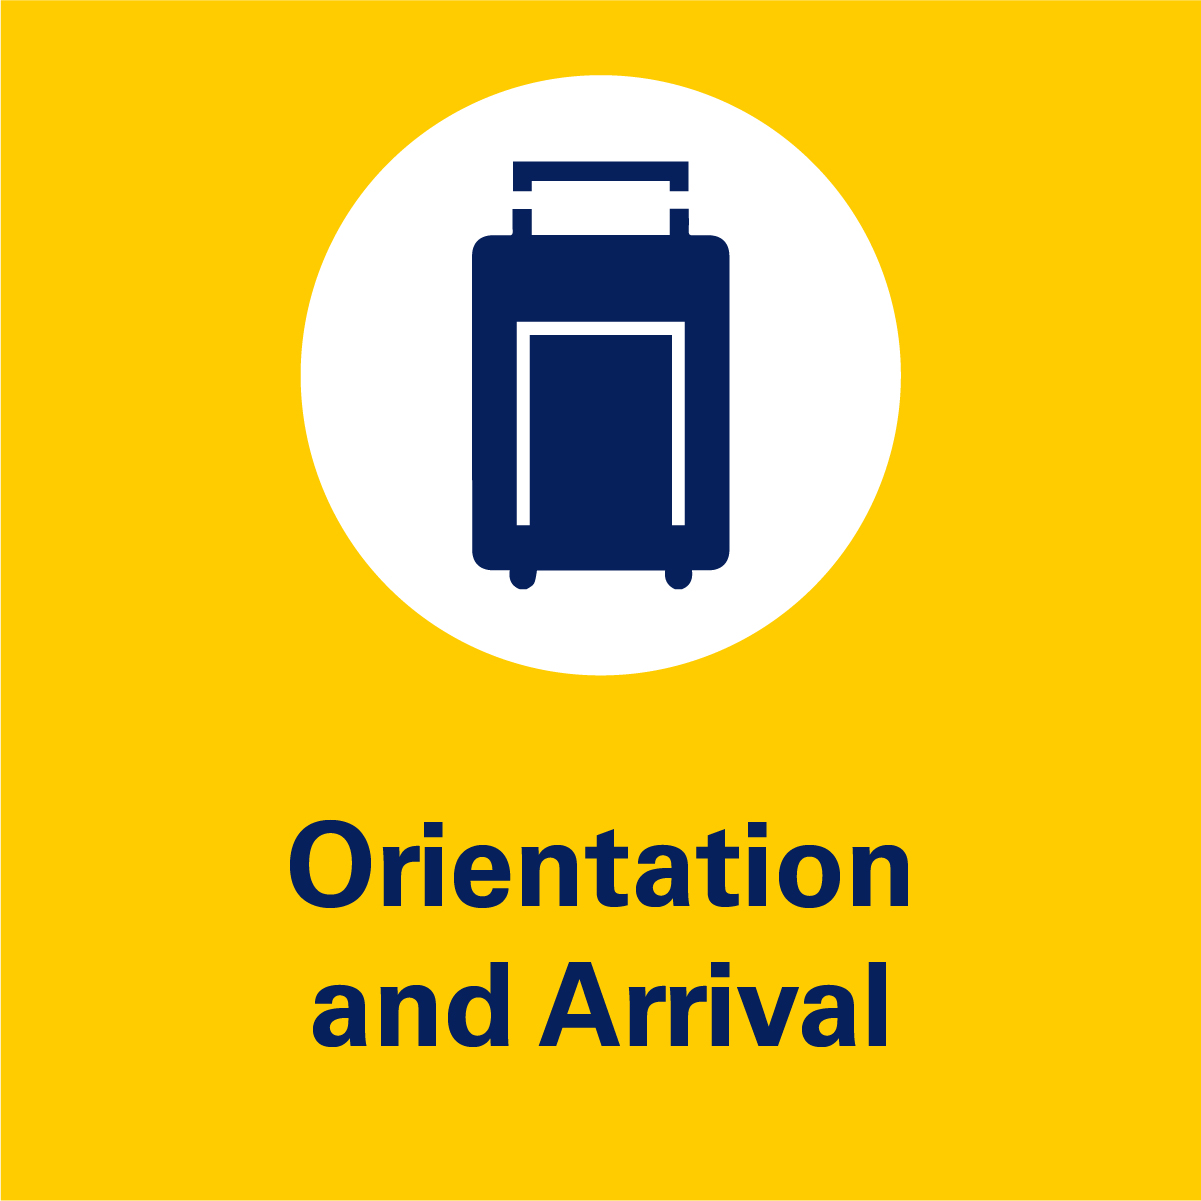 Orientation and Arrival